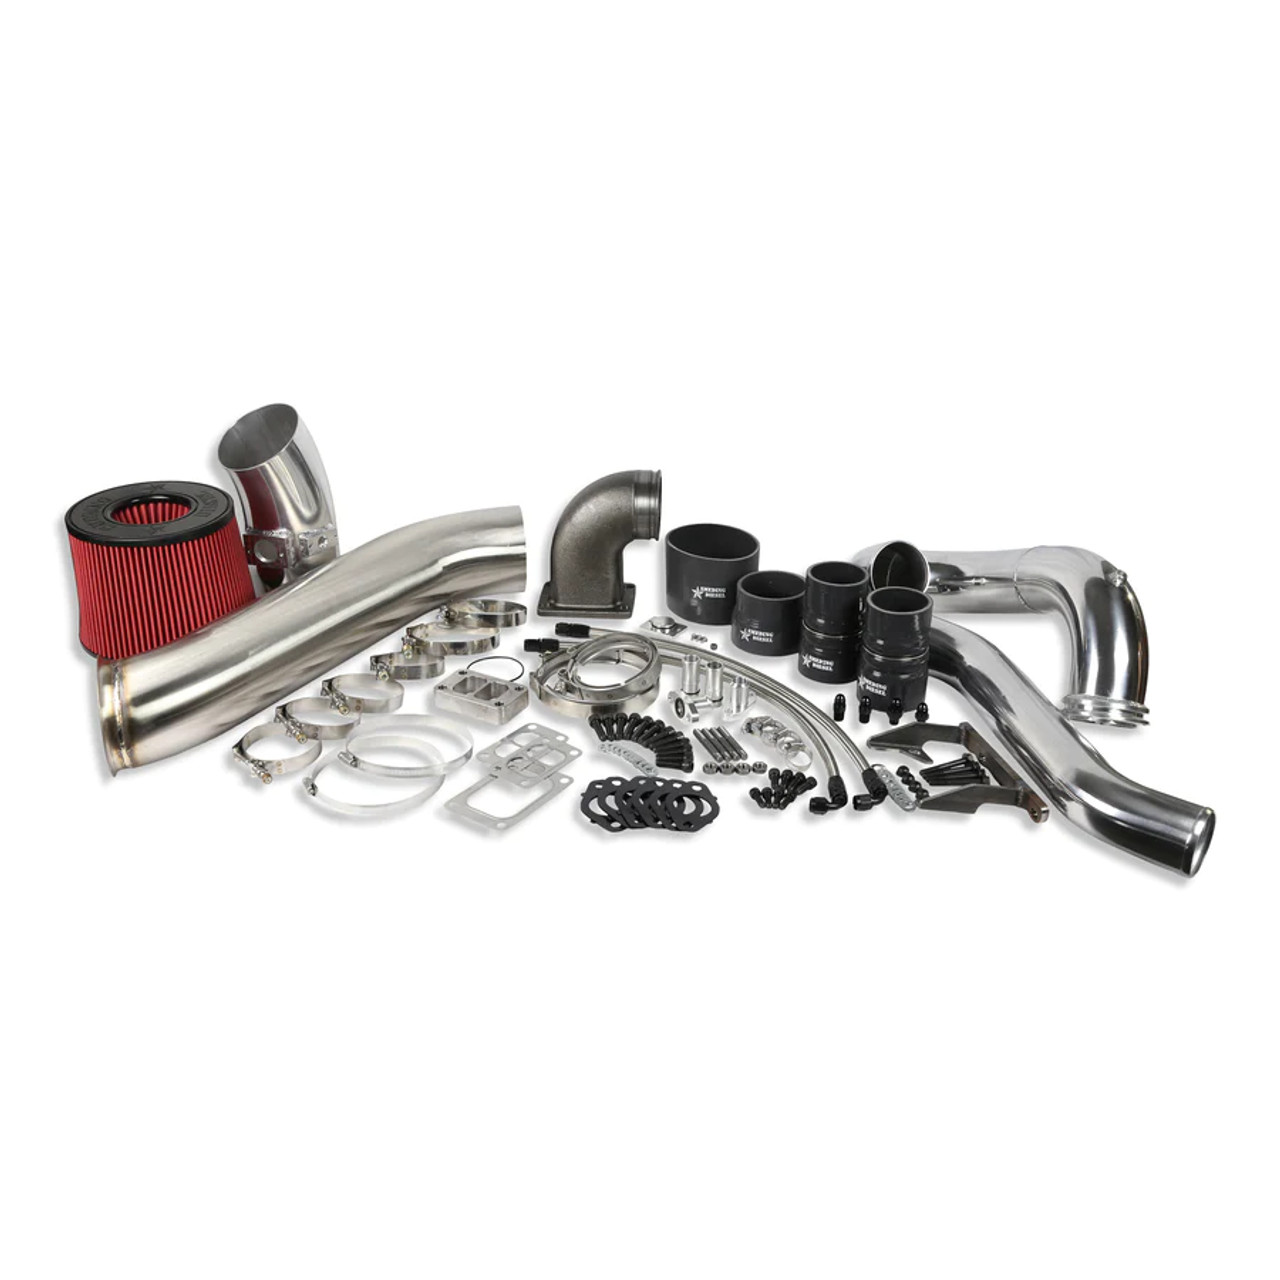 Smeding Diesel Compound Turbo Kit for 2003 to 2009 5.9/6.7LCummins - Main View